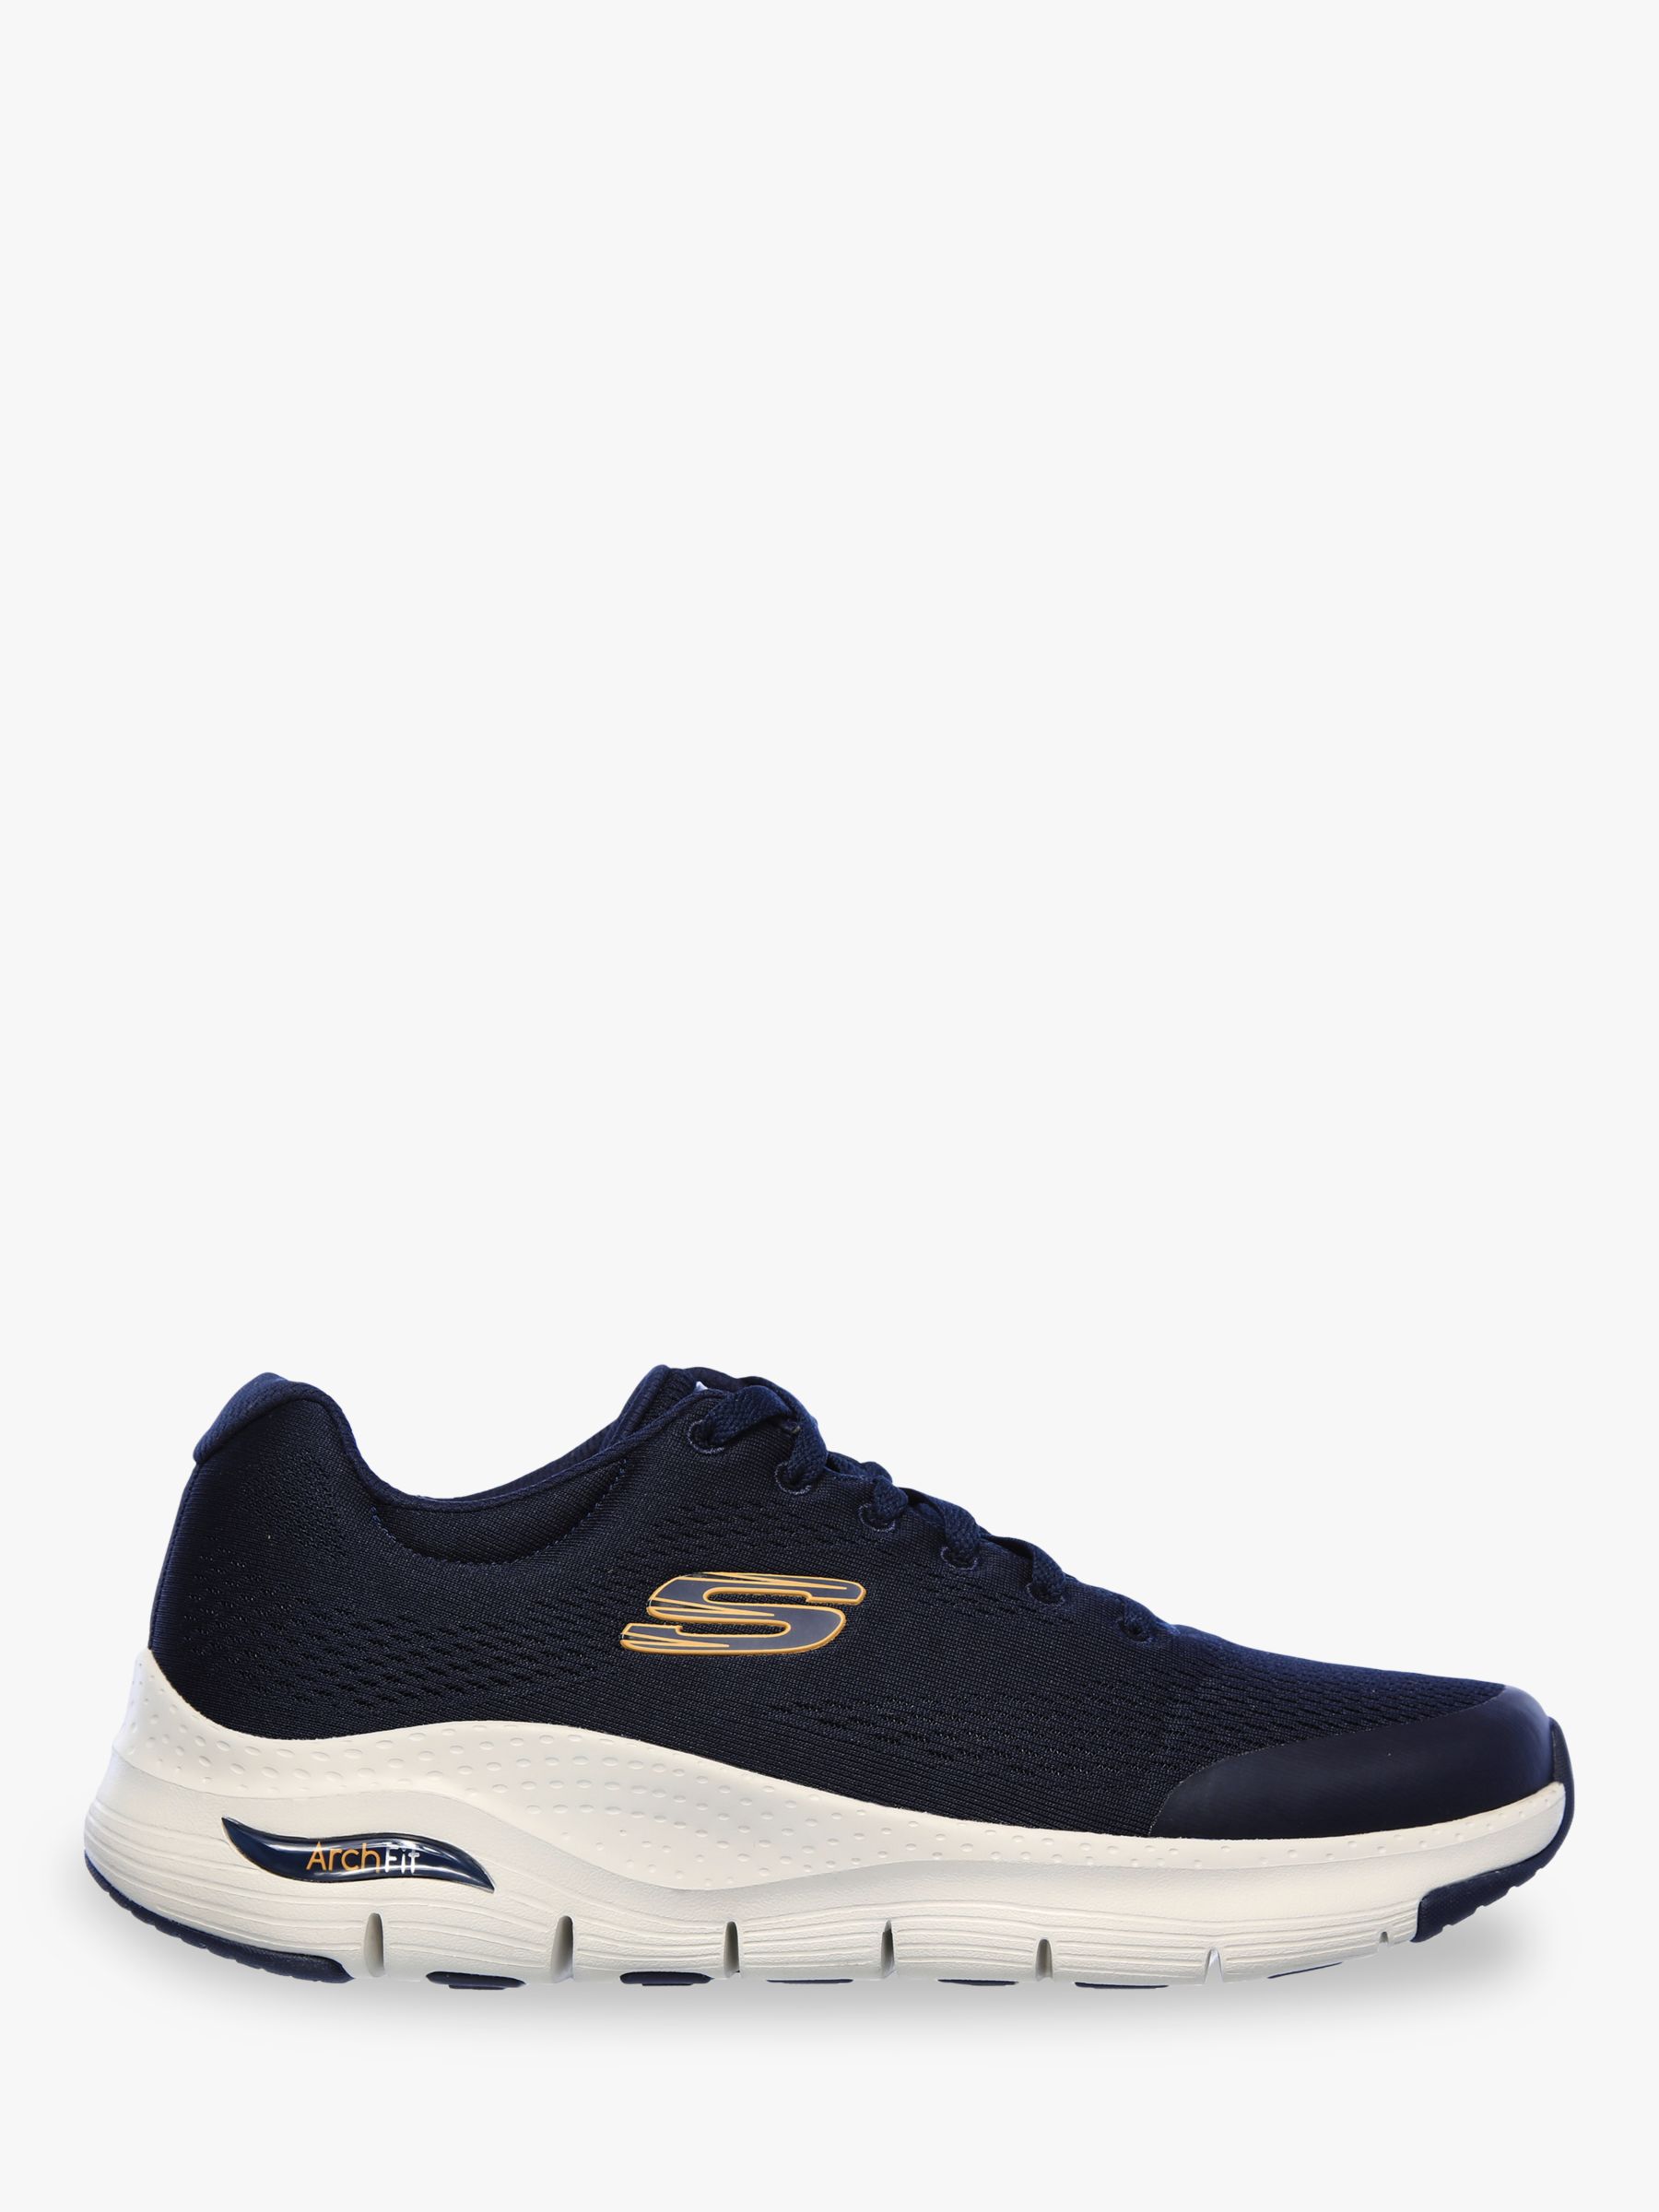 Skechers Arch Fit Trainers, Navy at John Lewis & Partners